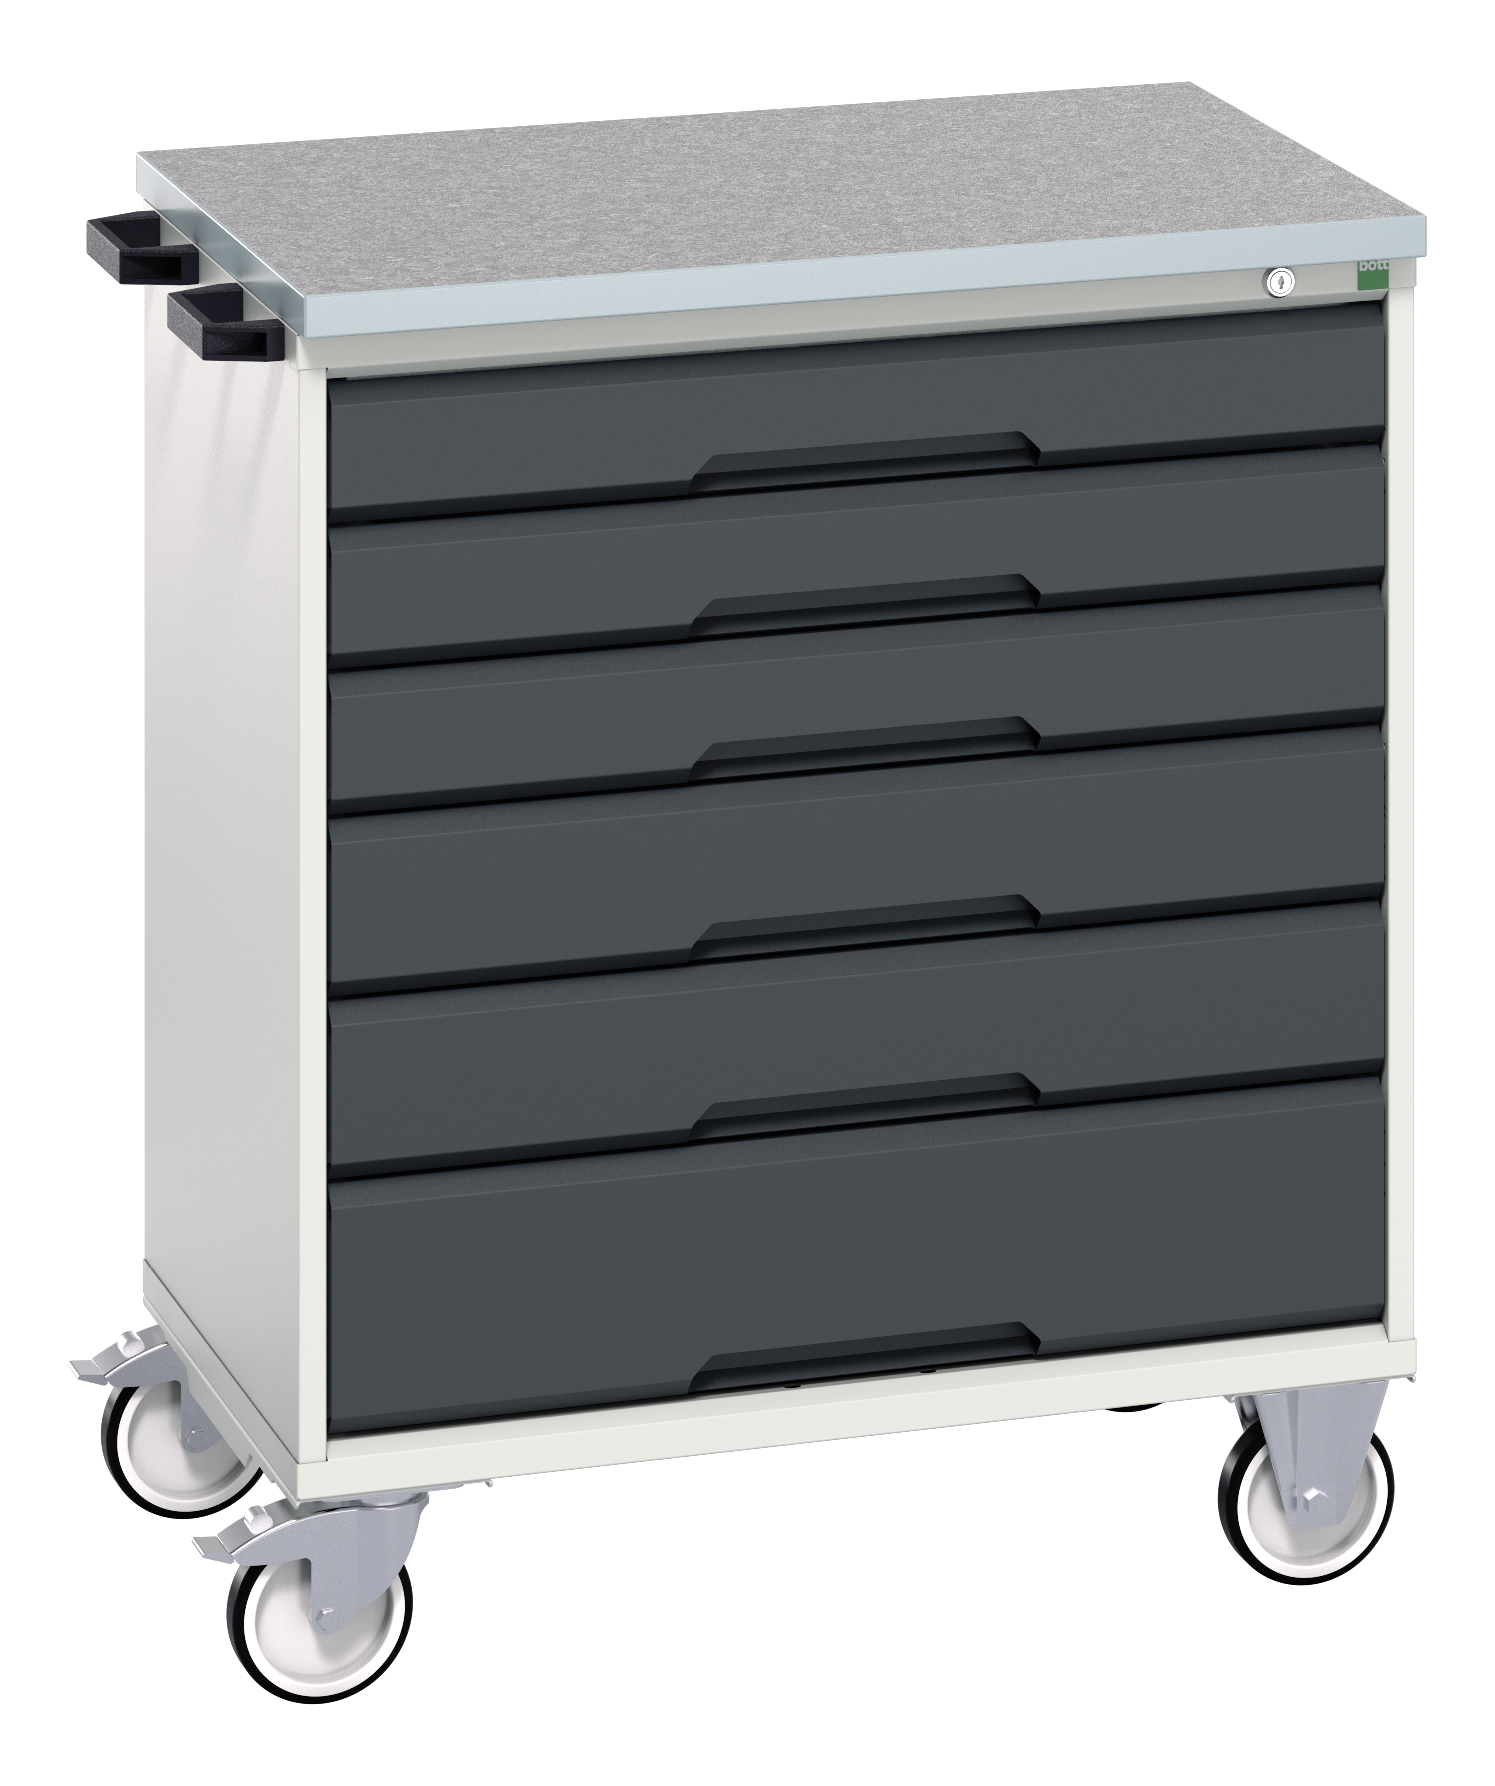 Bott Verso Mobile Drawer Cabinet With 6 Drawers & Lino Top - 16927003.19